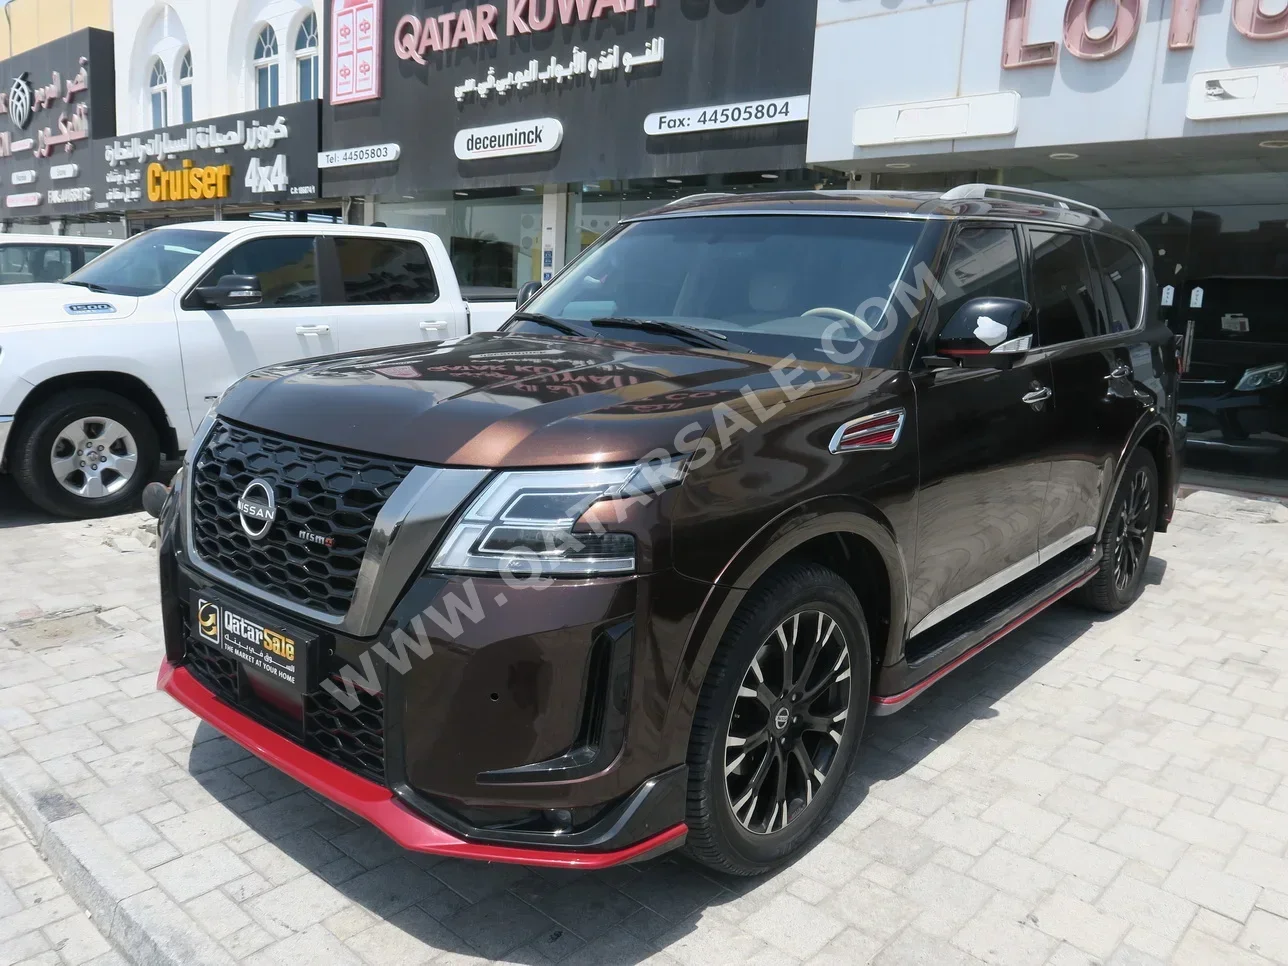  Nissan  Patrol  Platinum  2017  Automatic  190,000 Km  6 Cylinder  Four Wheel Drive (4WD)  SUV  Brown  With Warranty